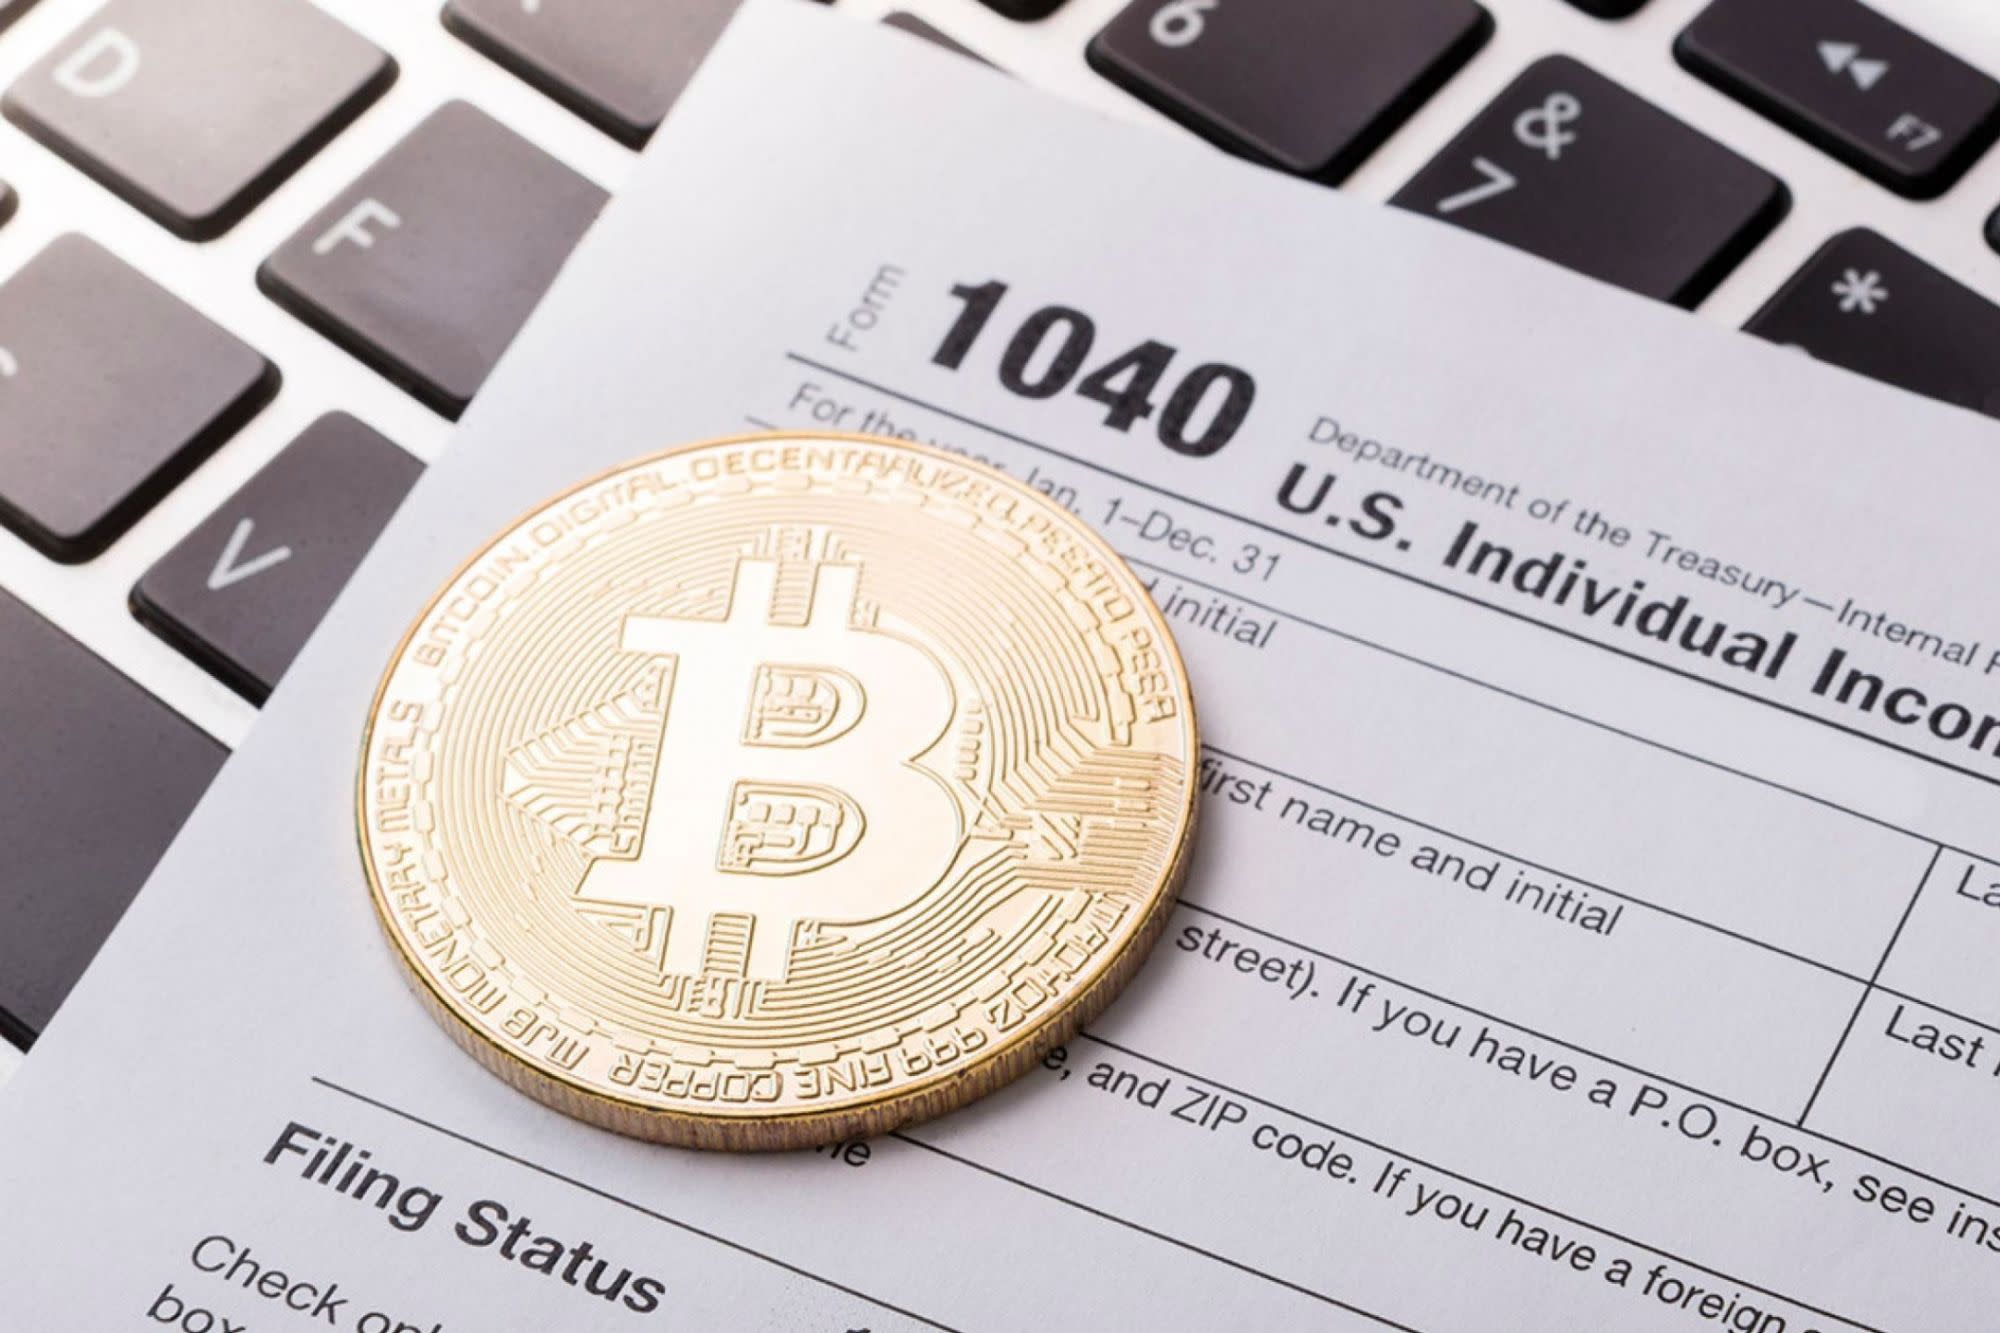 paying taxes on crypto currency